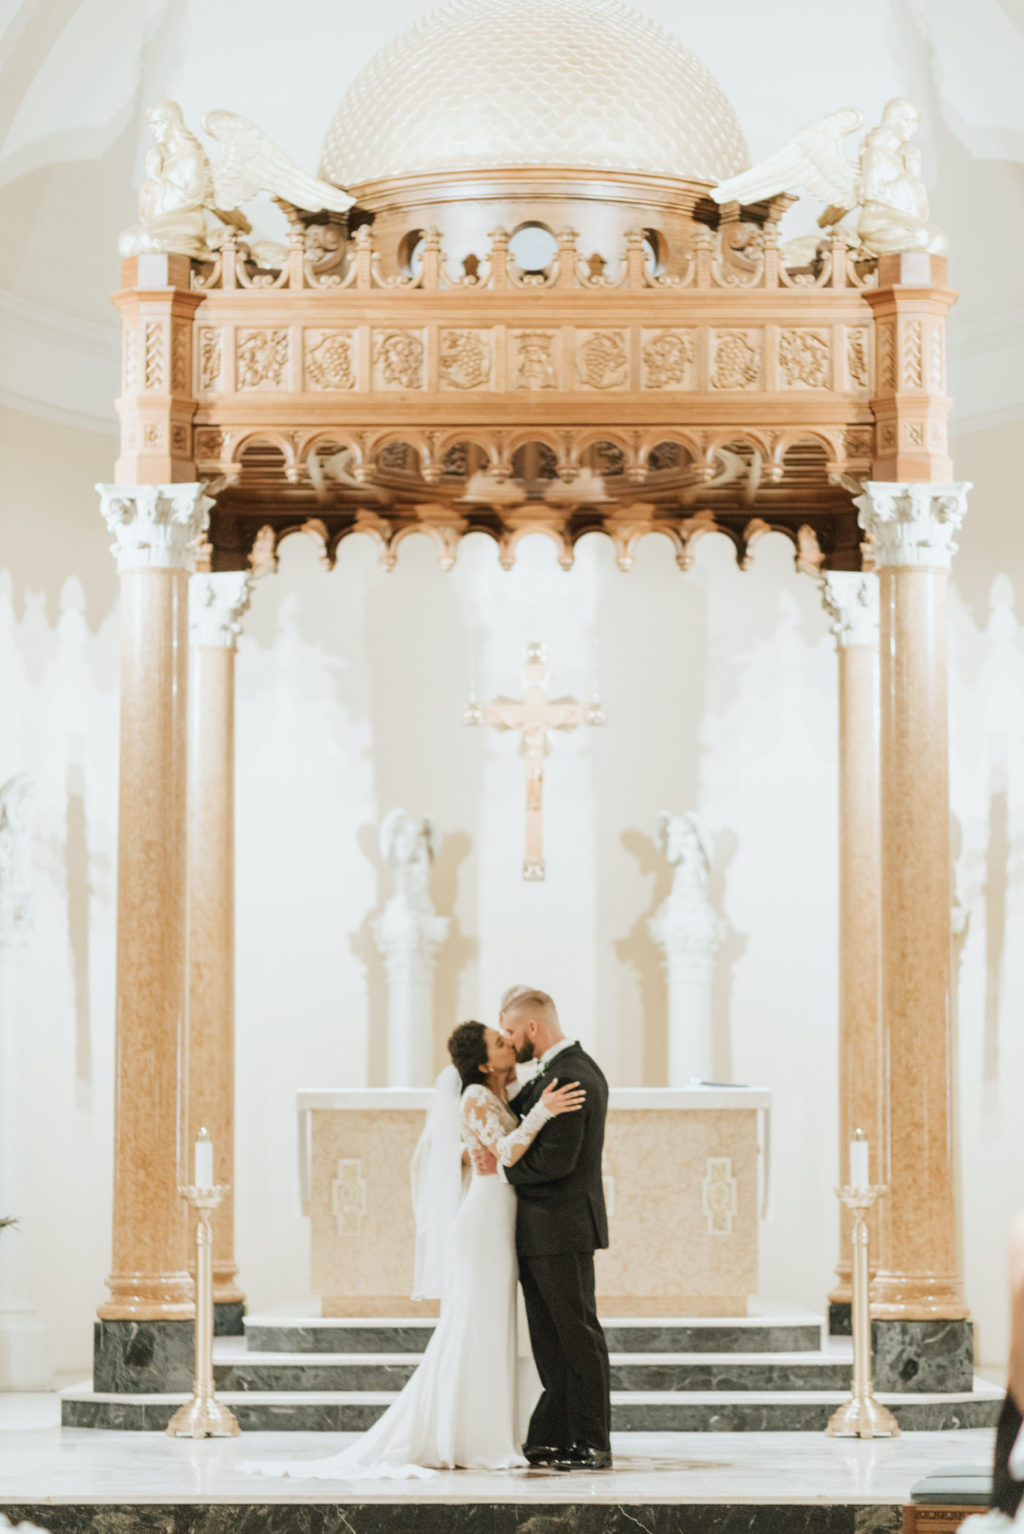 Classic Florida Bride and Groom Kiss At the Altar of Saint Mary Our Lady of Grace Catholic Church| Tampa Bay Wedding Planner Blue Skies Weddings and Events